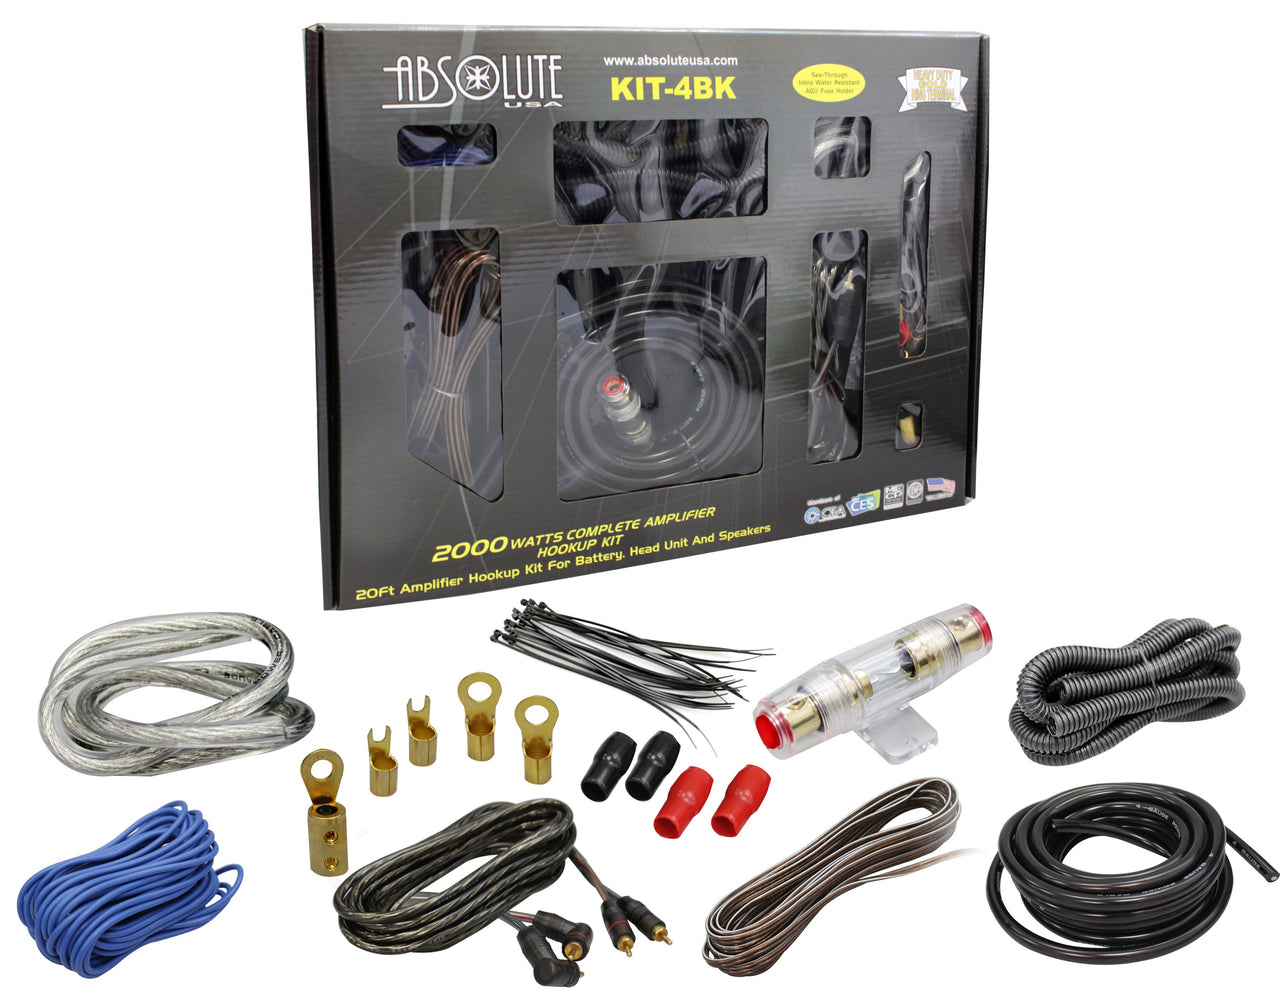 Absolute KIT4BK AMP KIT<br/>Complete PRO Marine Auto Car RV 4 Gauge 2000 Watts Amplifier Complete Installation Amp Kit Power Wiring with Black Accent Color Scheme